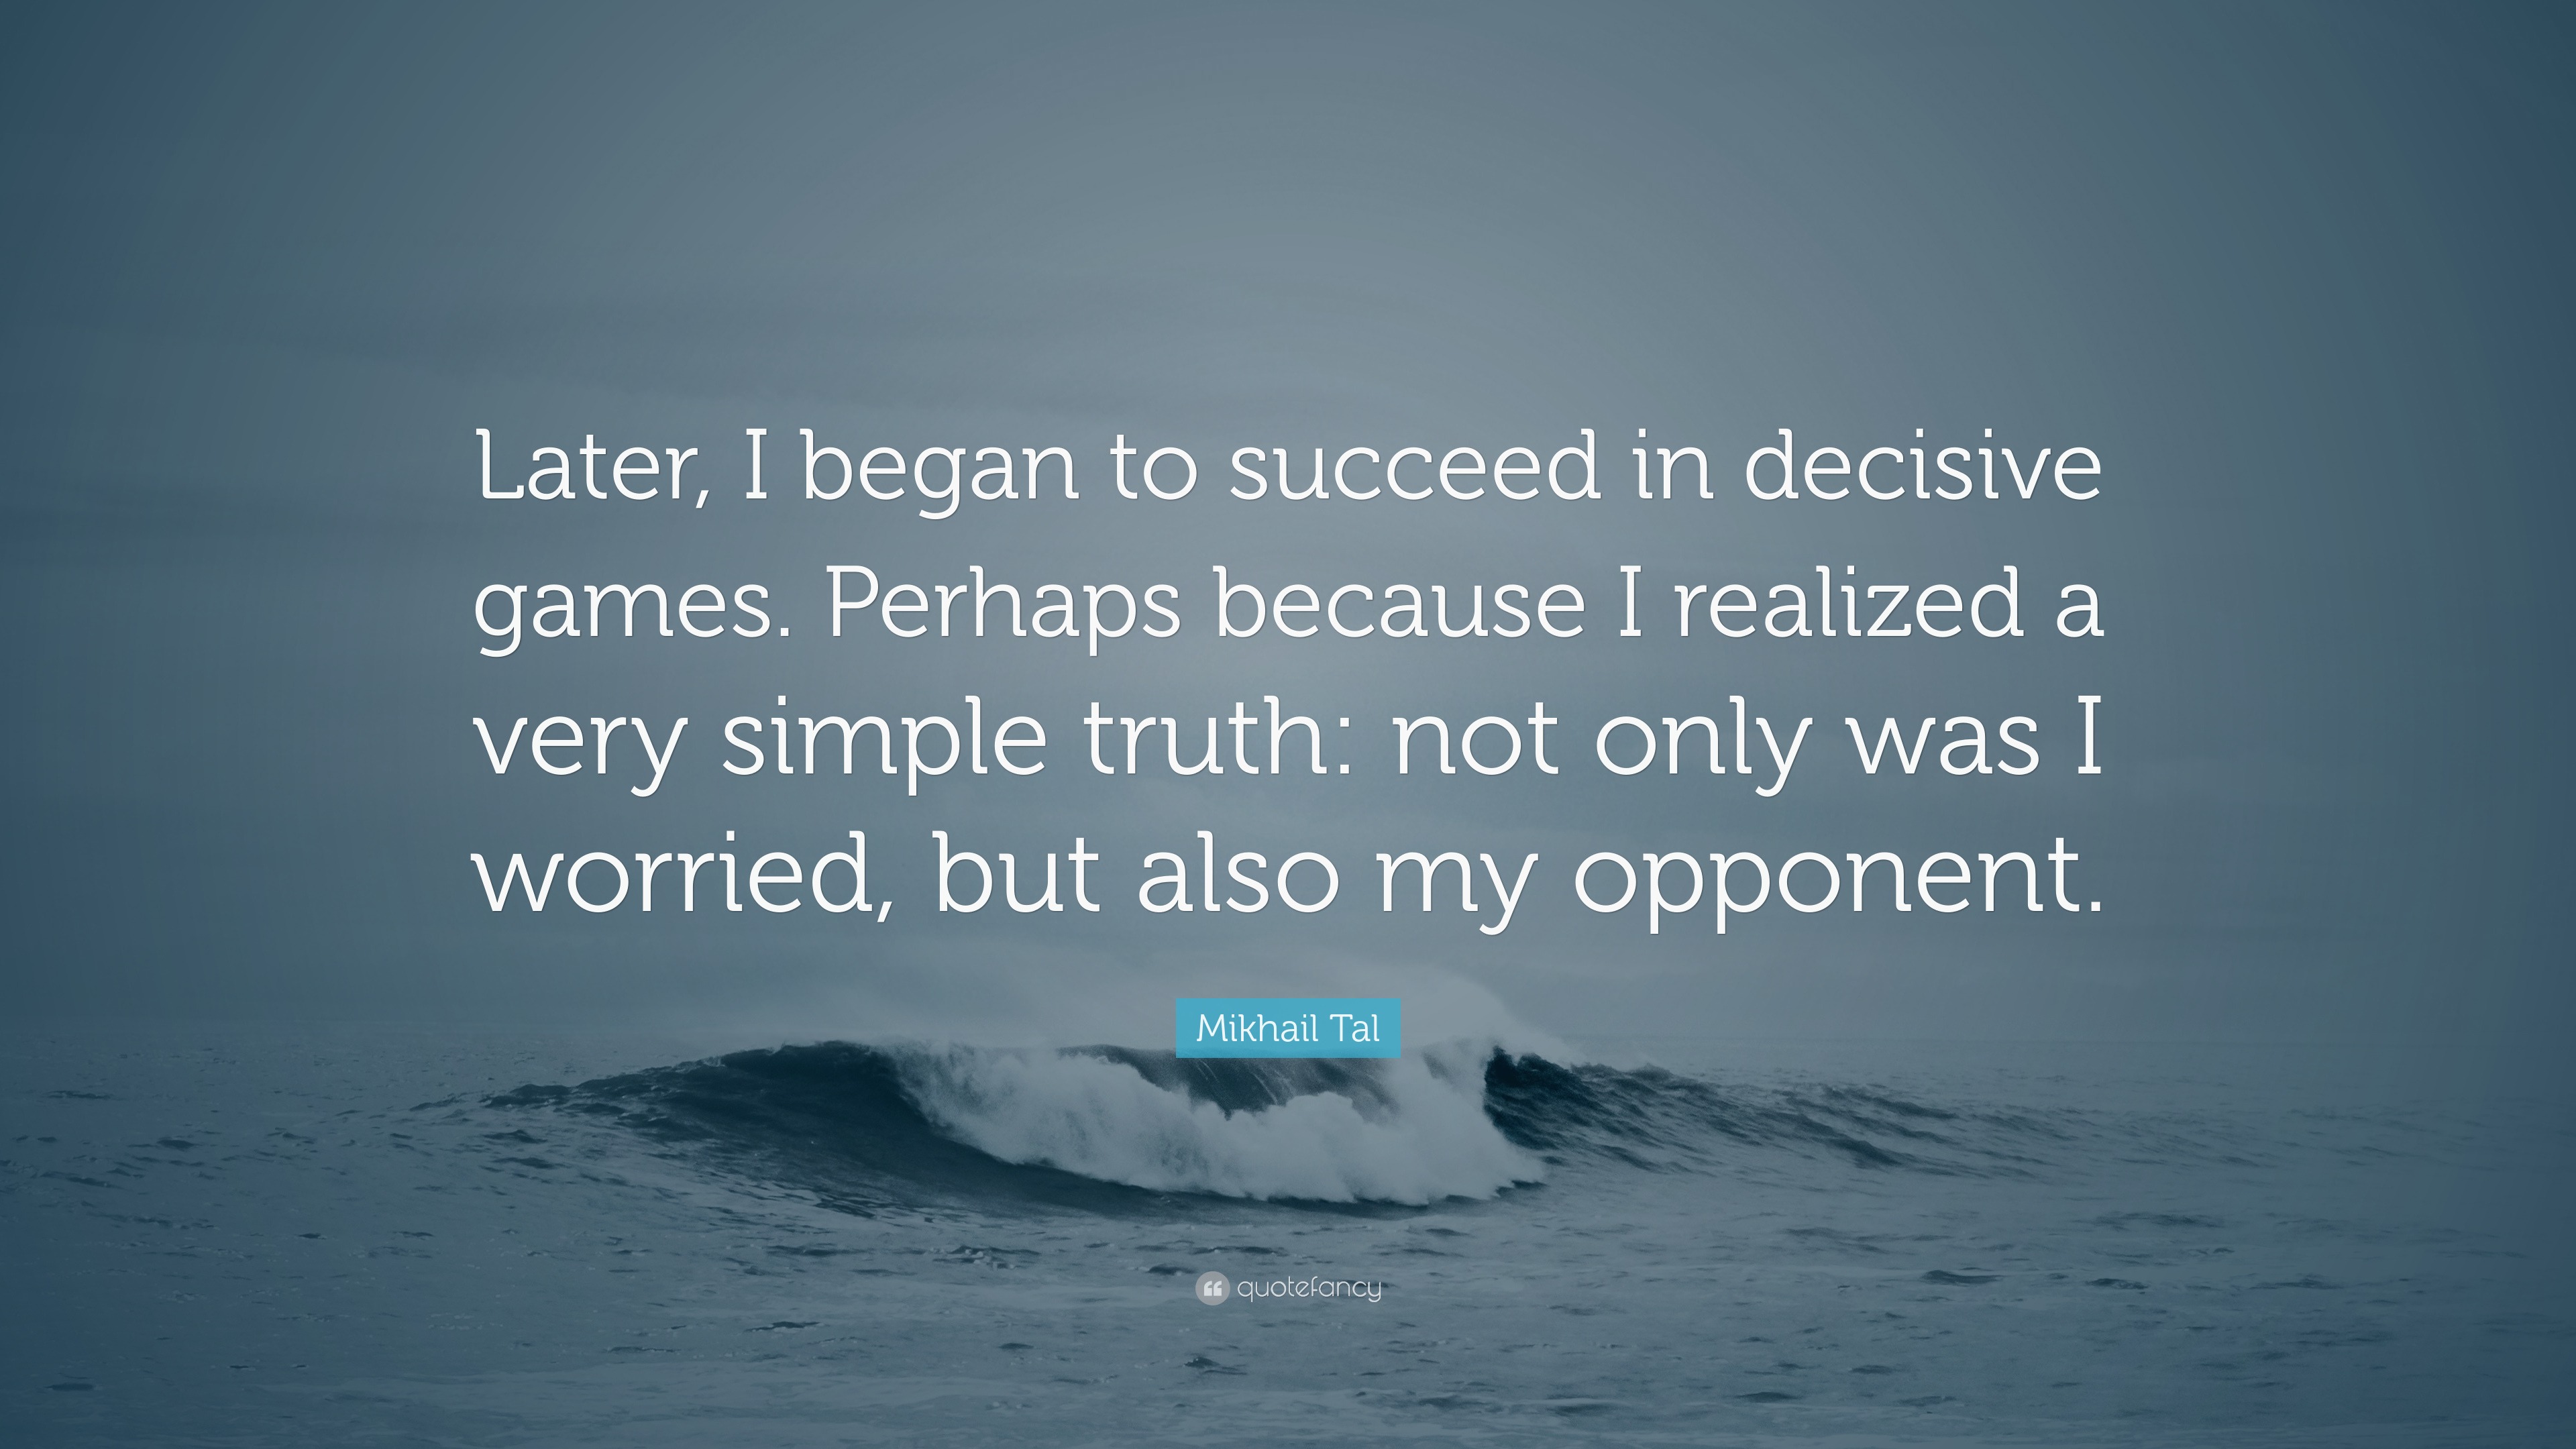 Mikhail Tal Quote: “Later, I began to succeed in decisive games. Perhaps  because I realized a very simple truth: not only was I worried, but”